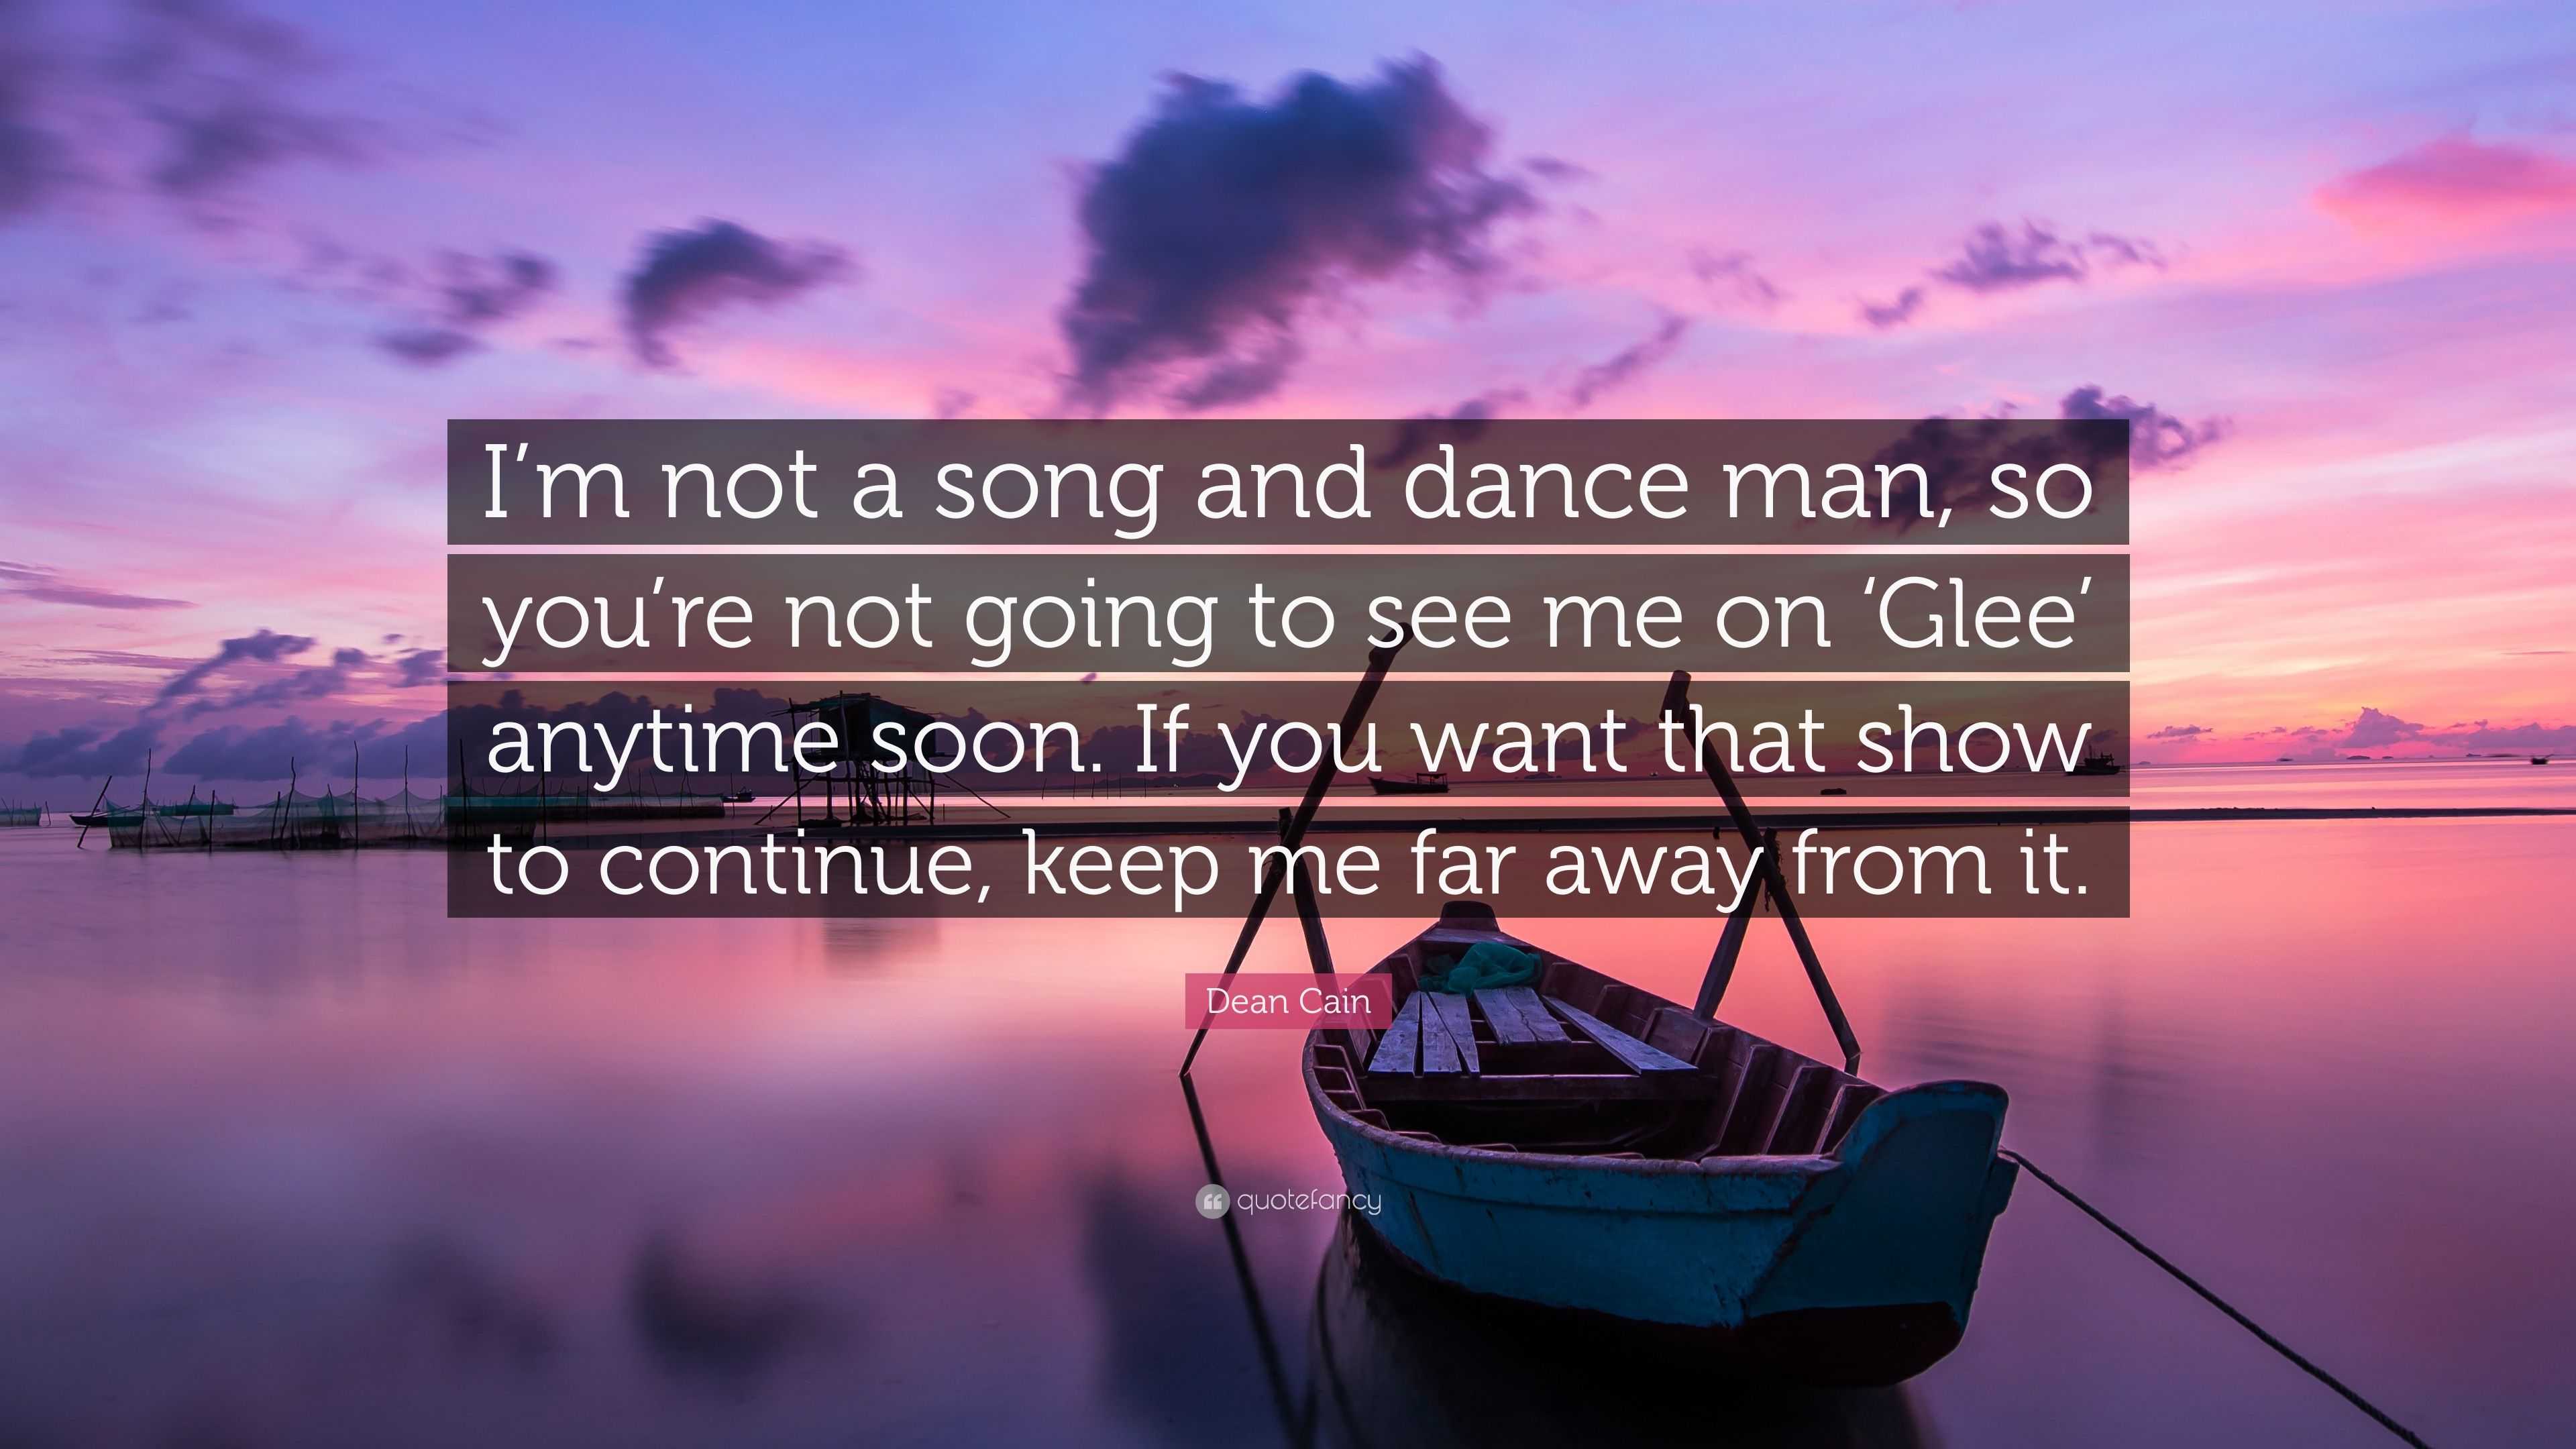 dance with me one more time #lyrics #spe